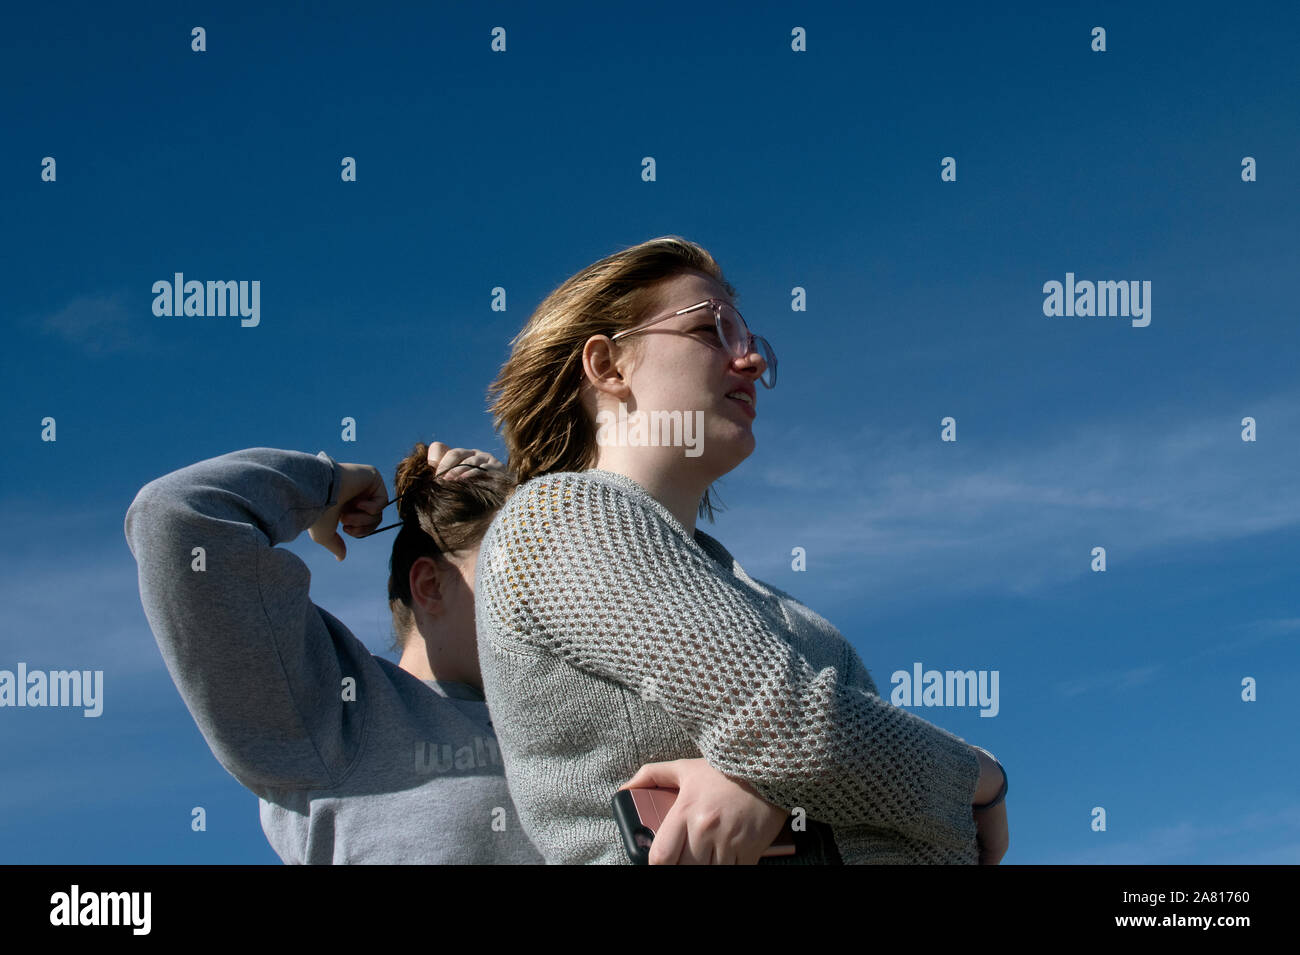 Two young standing wih sky in background Stock Photo